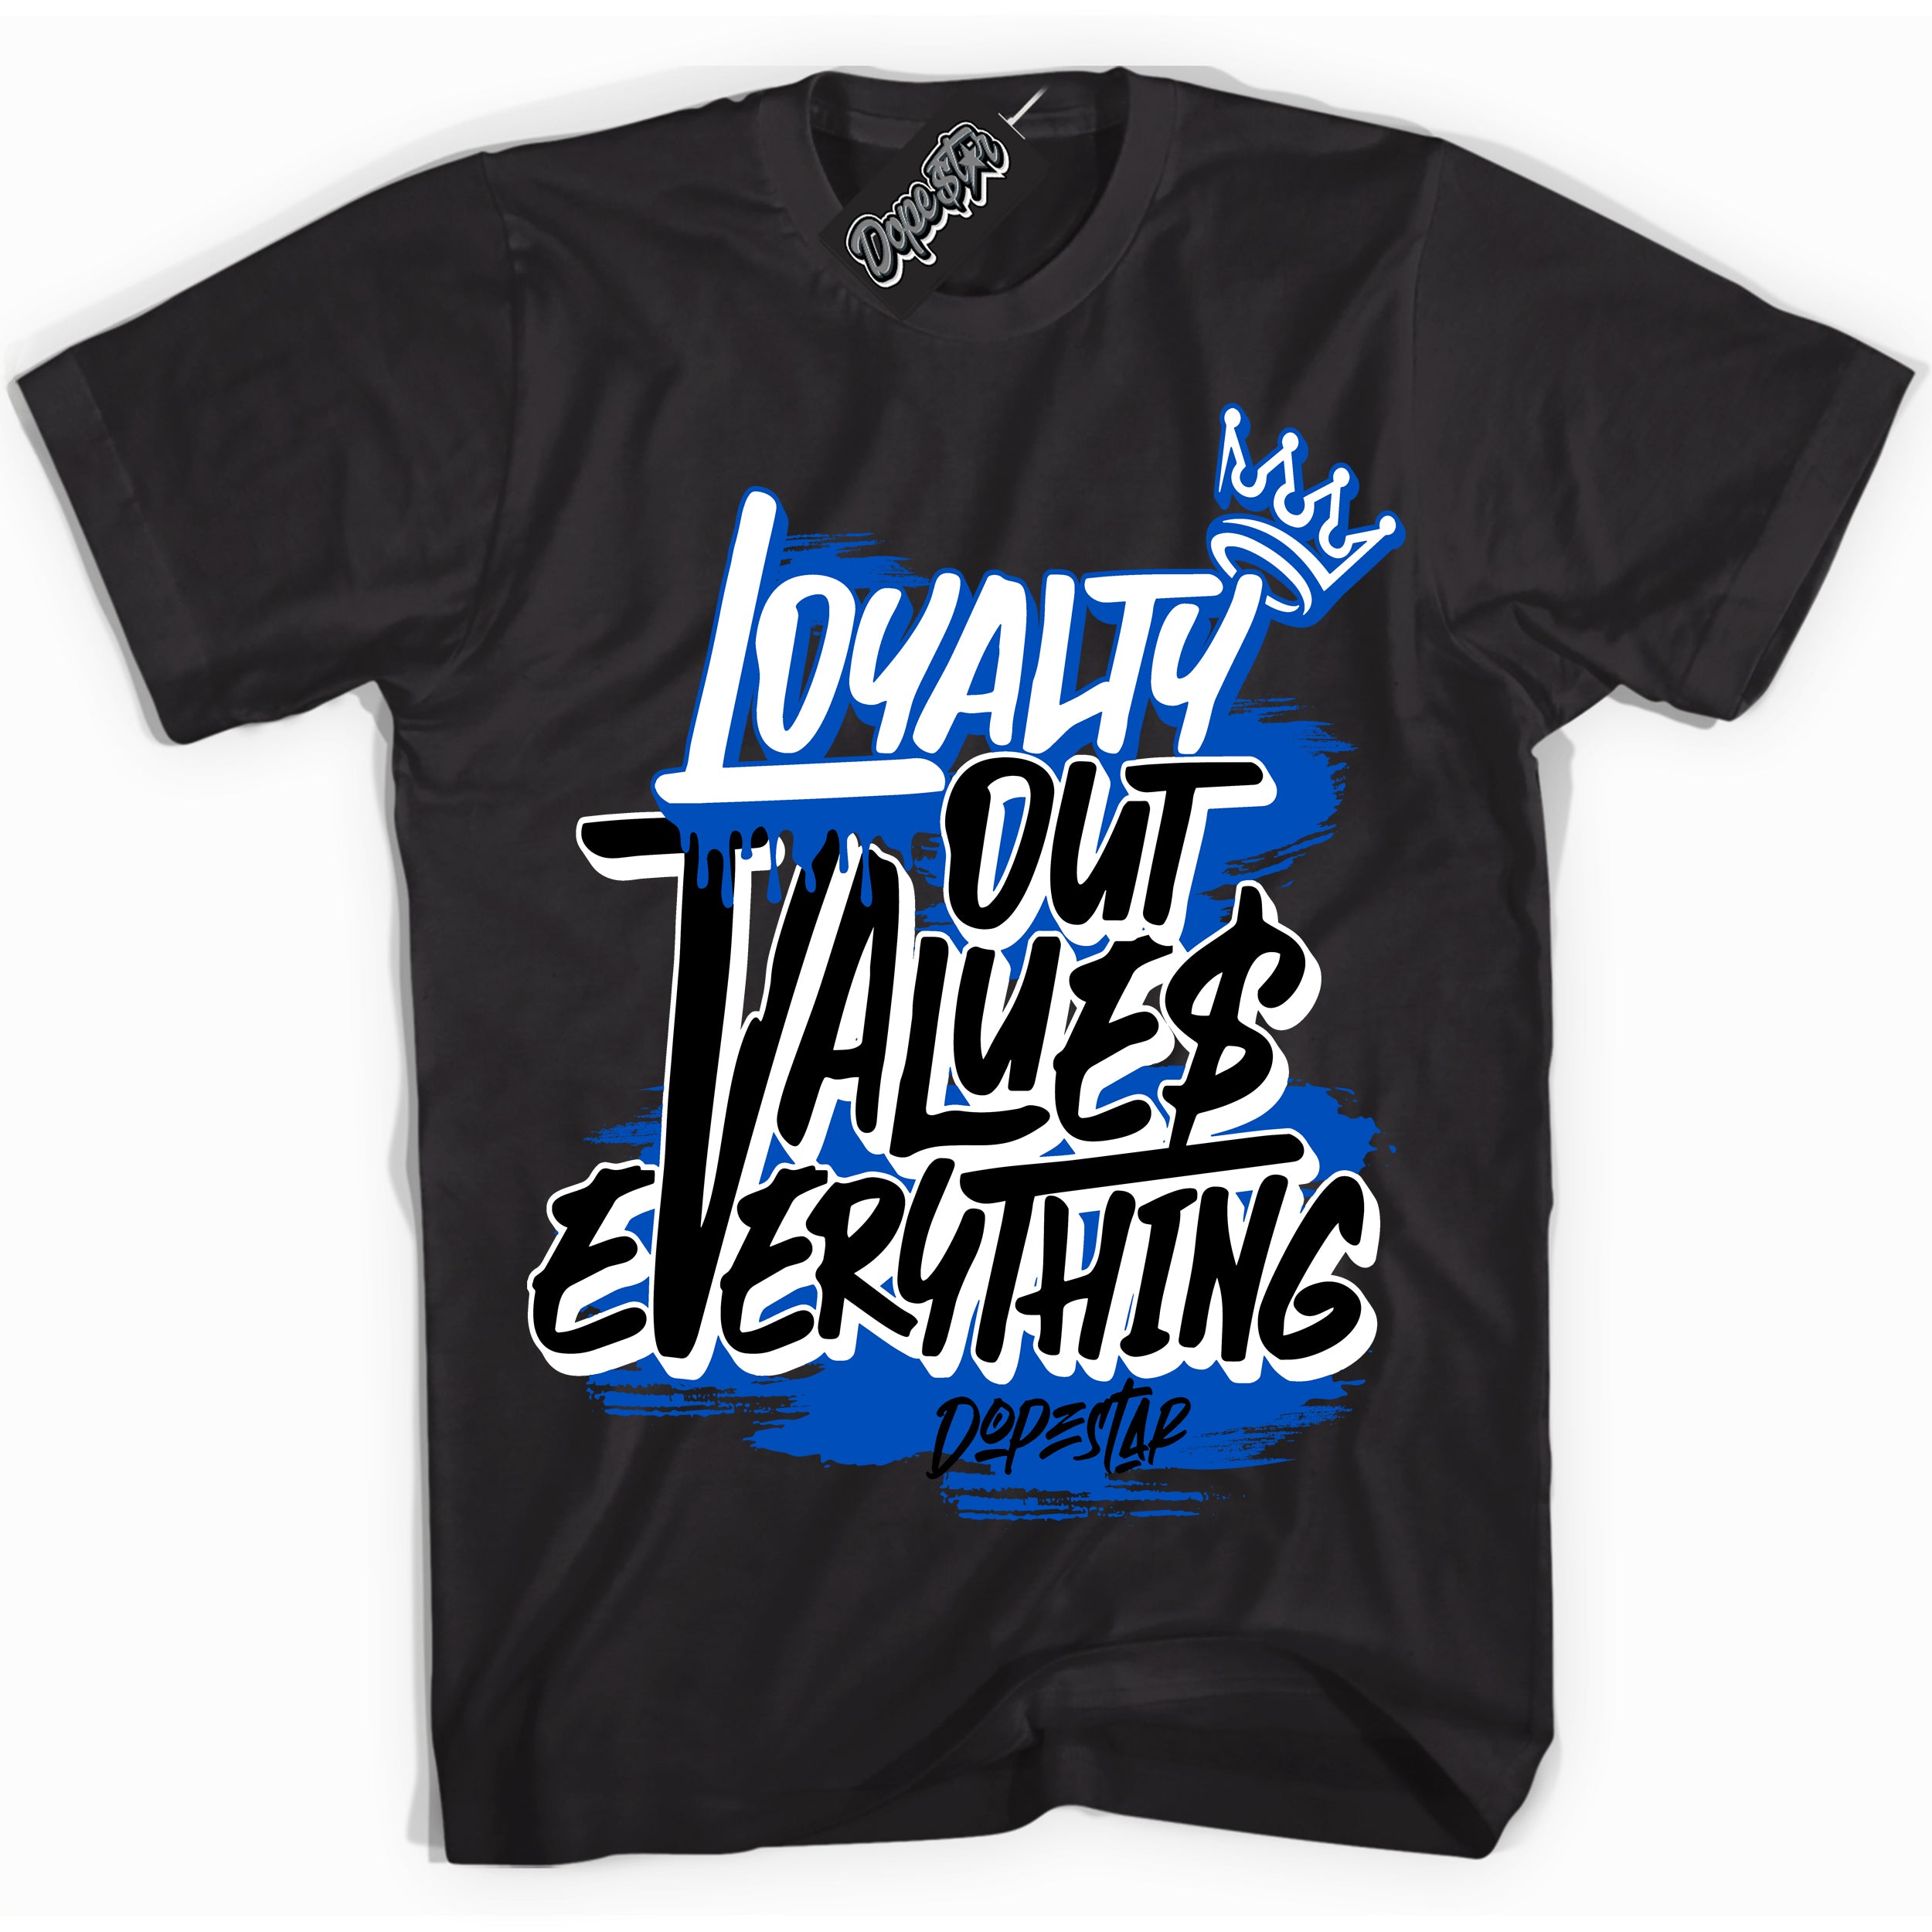 Cool Black Shirt with “ Loyalty Out Values Everything” design that perfectly matches Royal Reimagined 1s Sneakers.